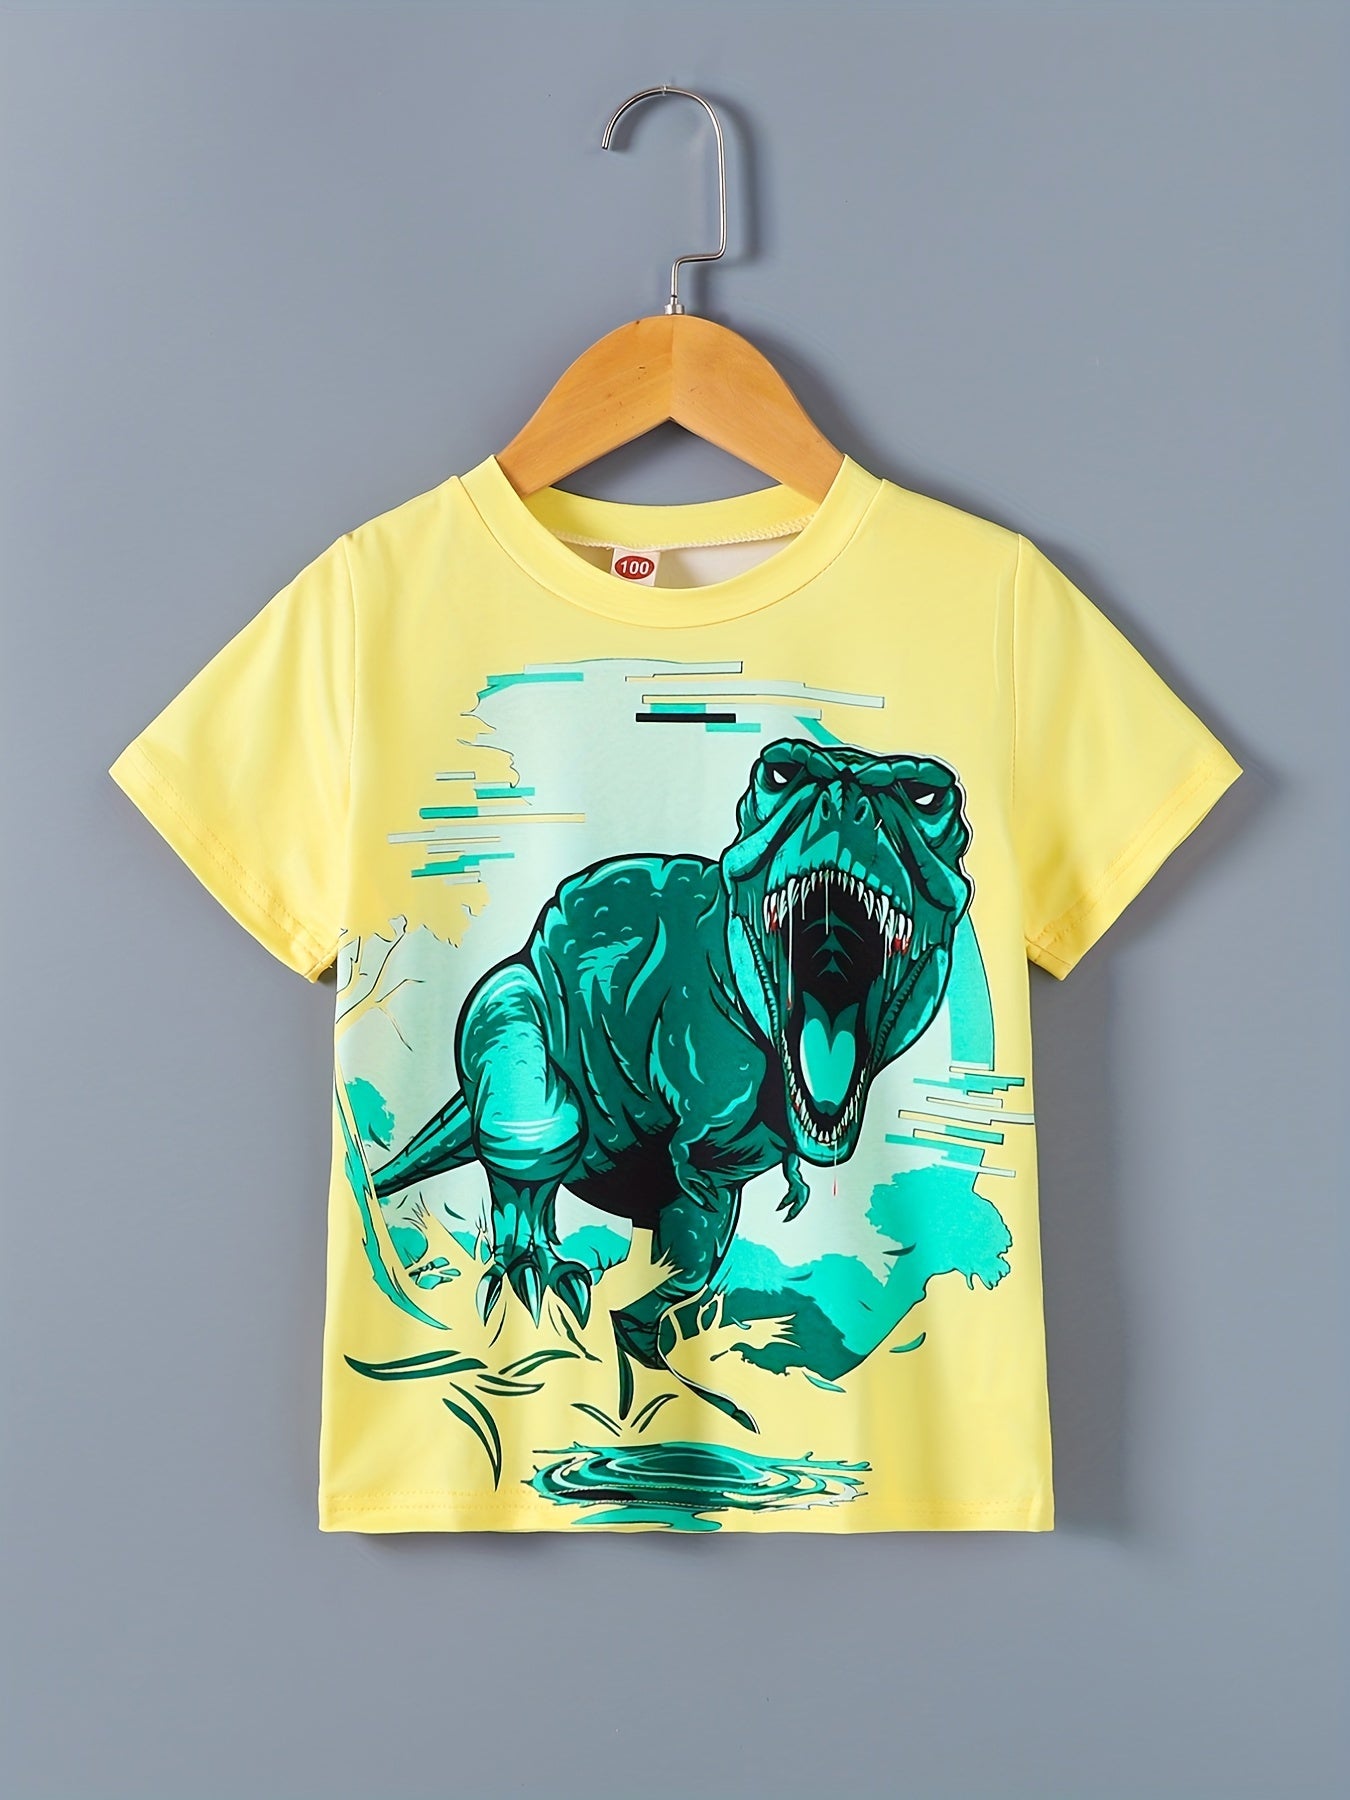 Boys Dinosaur Round Neck T-shirt Tee Top Casual Soft Comfortable For Summer Kids Clothes